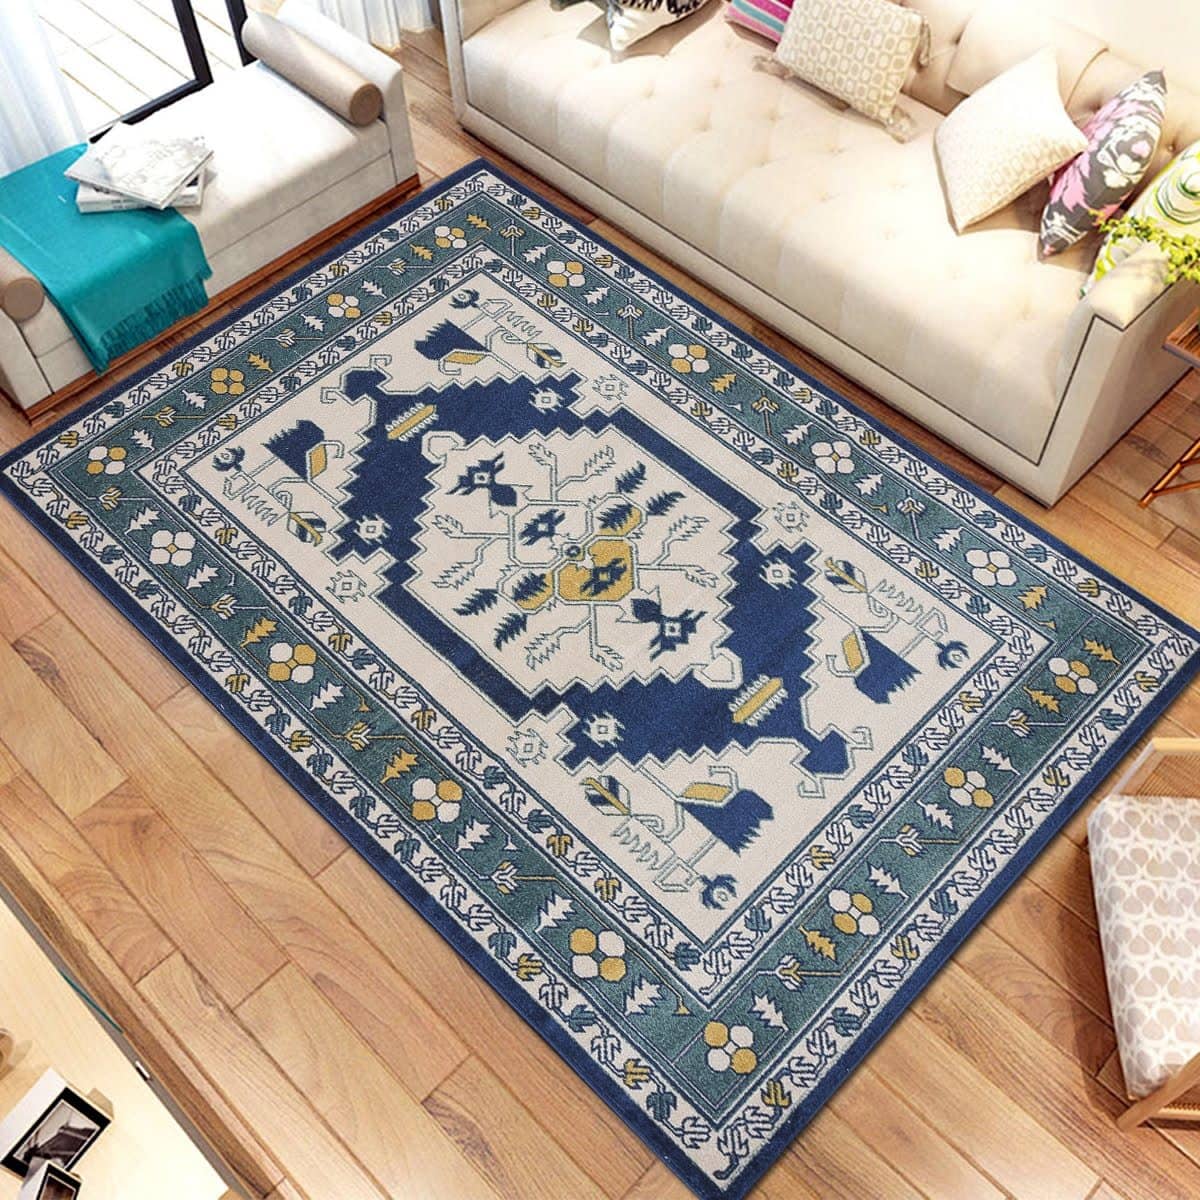 Persian Style Traditional Oriental Medallion Area Rug KLM 950 - Context USA - AREA RUG by MSRUGS